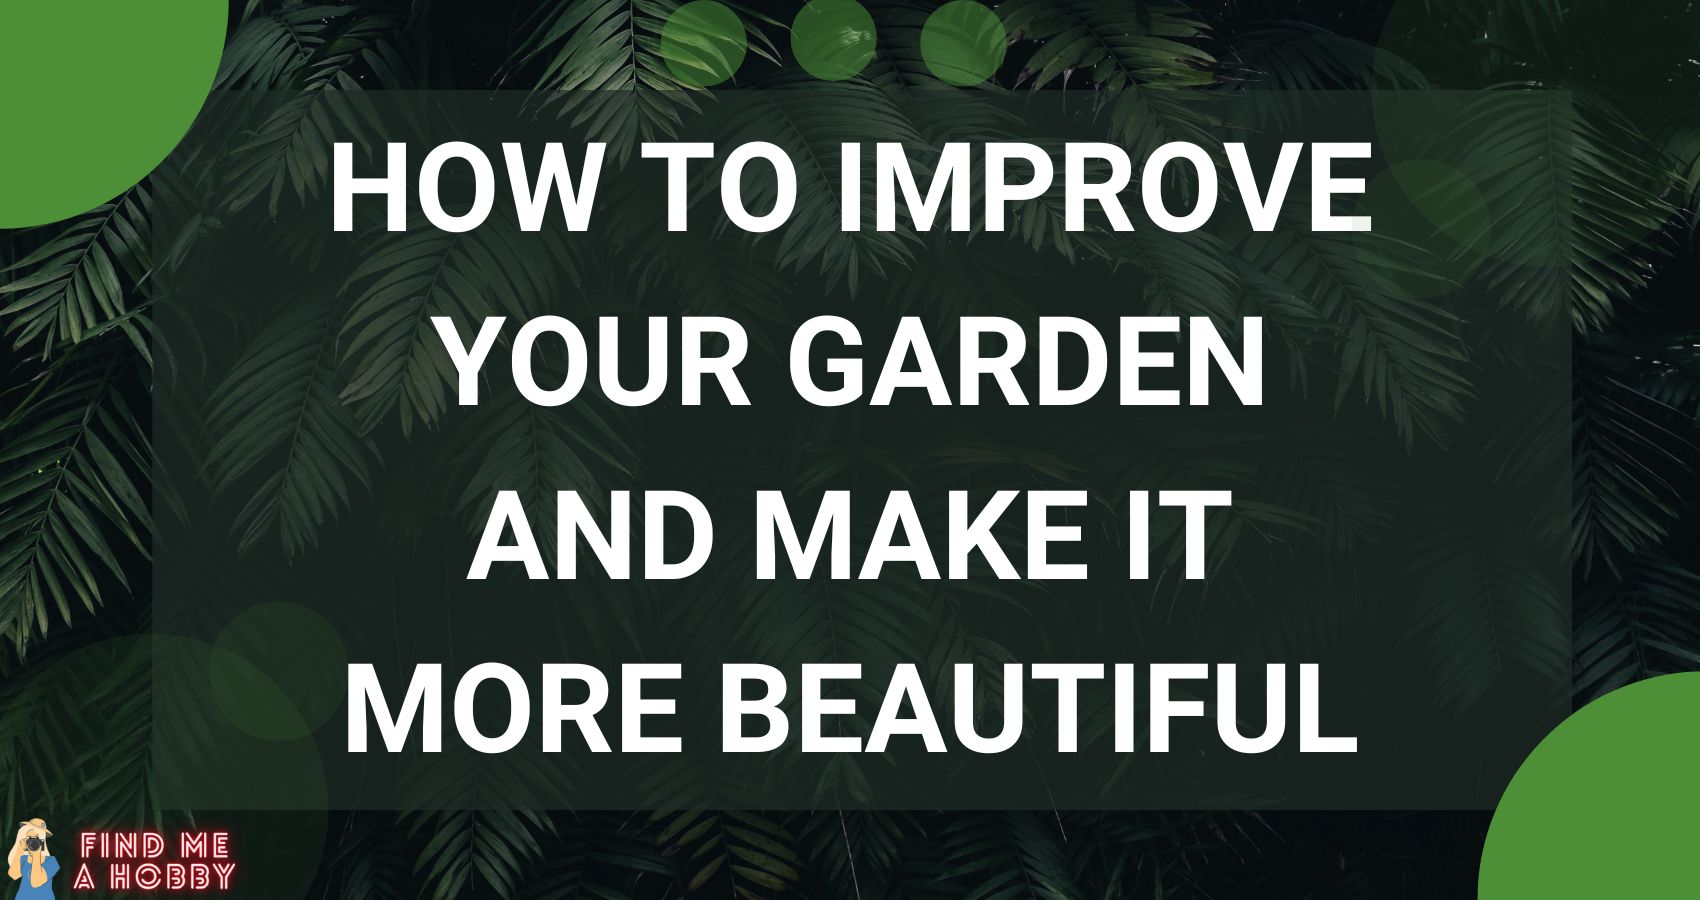 How to Improve Your Garden and Make It More Beautiful